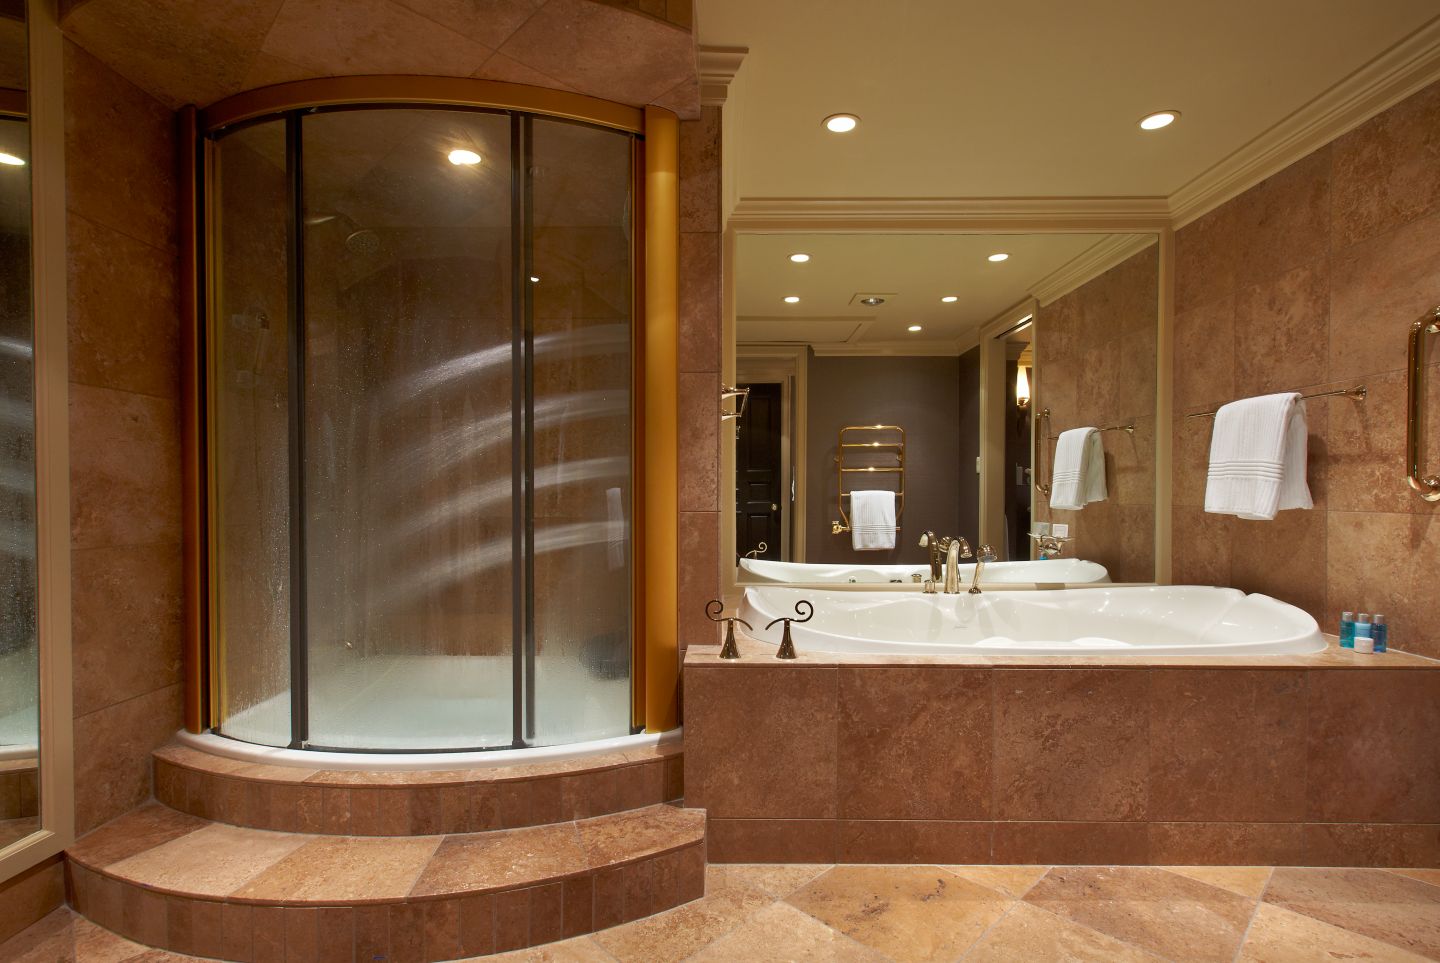 The shower and whirlpool inside the bathroom of The American Club